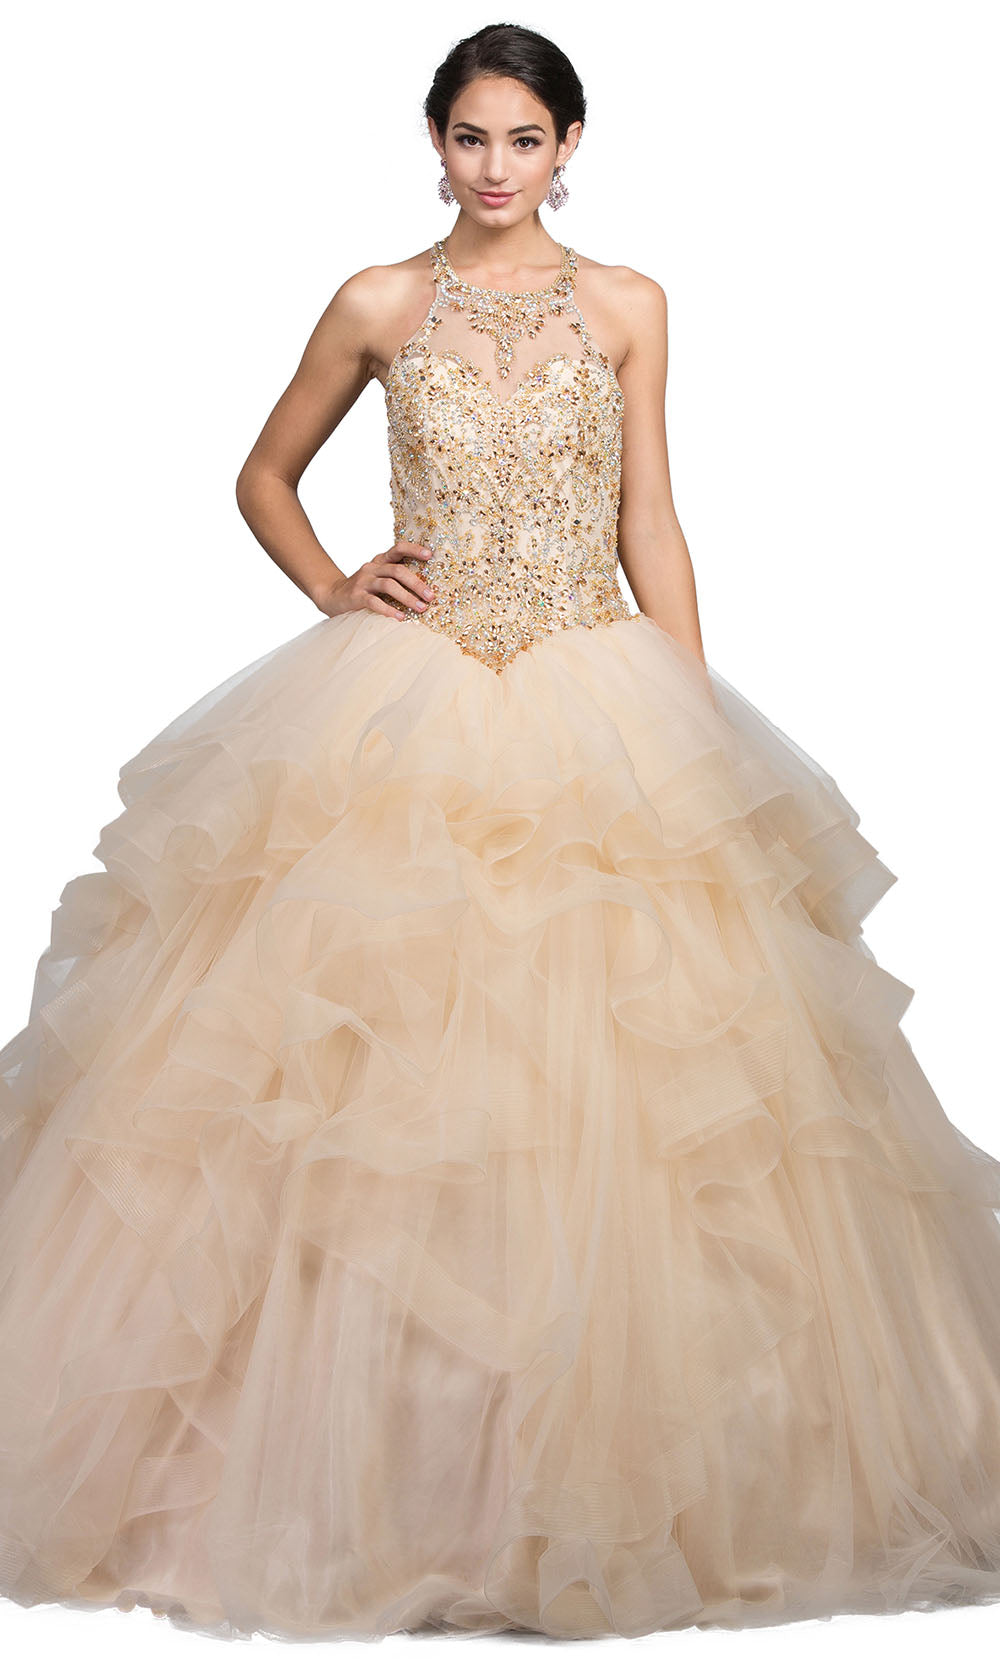 Dancing Queen - 1231 Halter Crystal Beaded Ballgown In Neutral and Gold